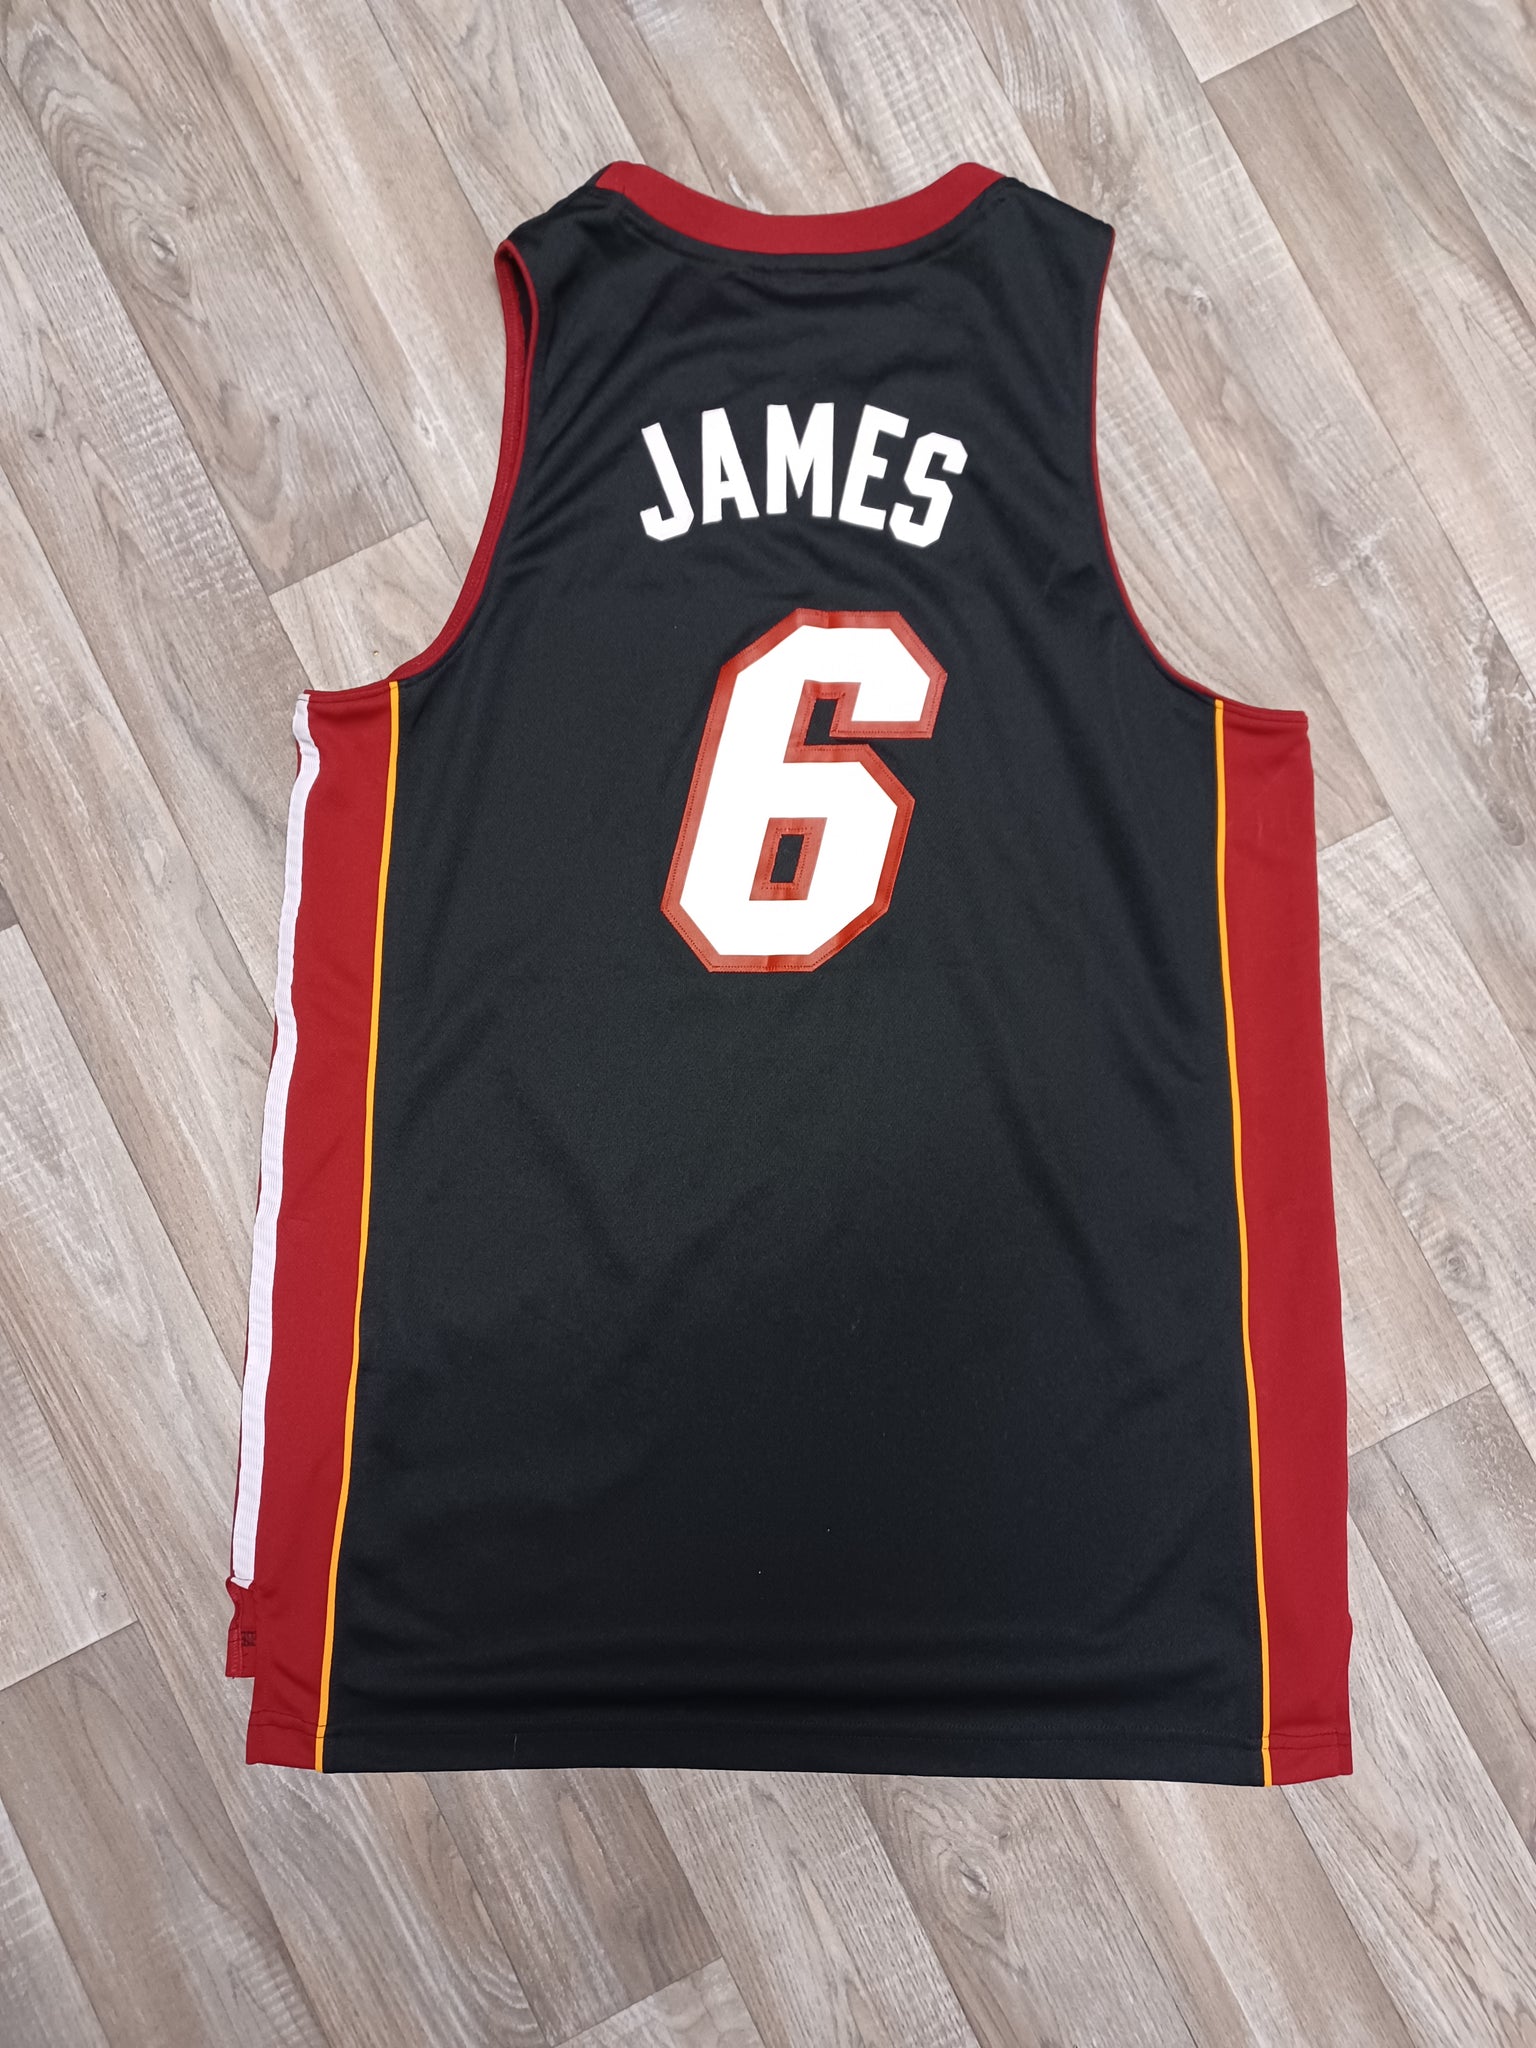 🏀 LeBron James Miami Heat Jersey Size Large – The Throwback Store 🏀